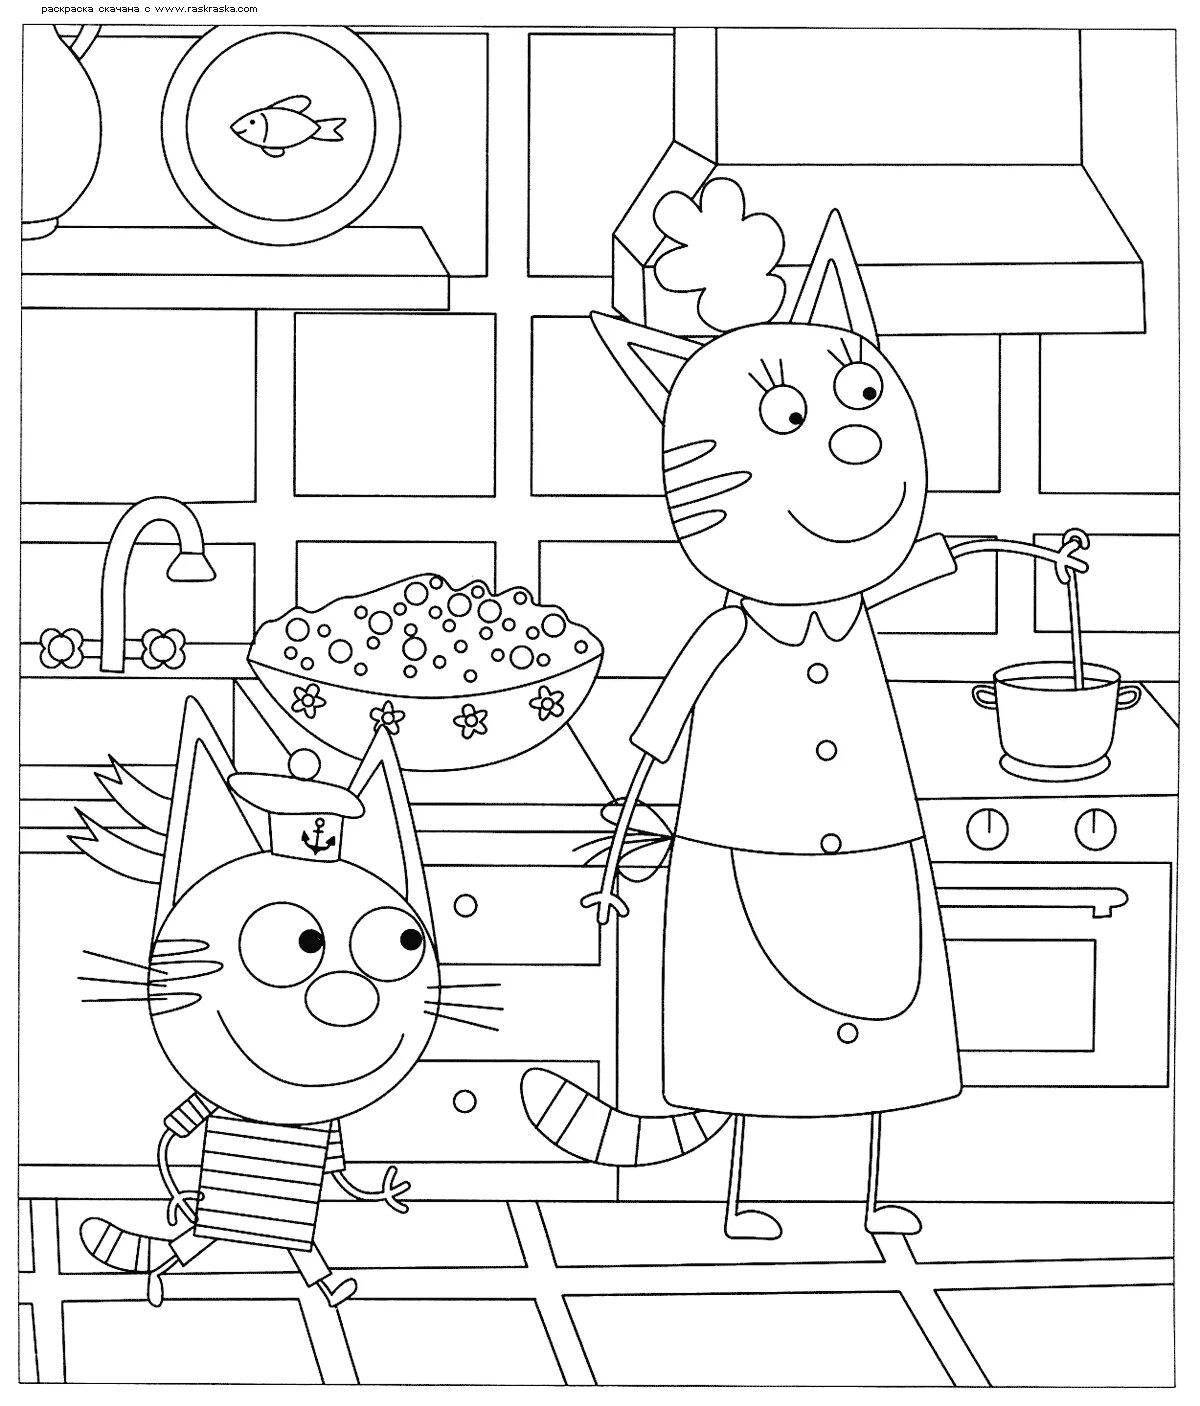 Coloring page cute family of three cats